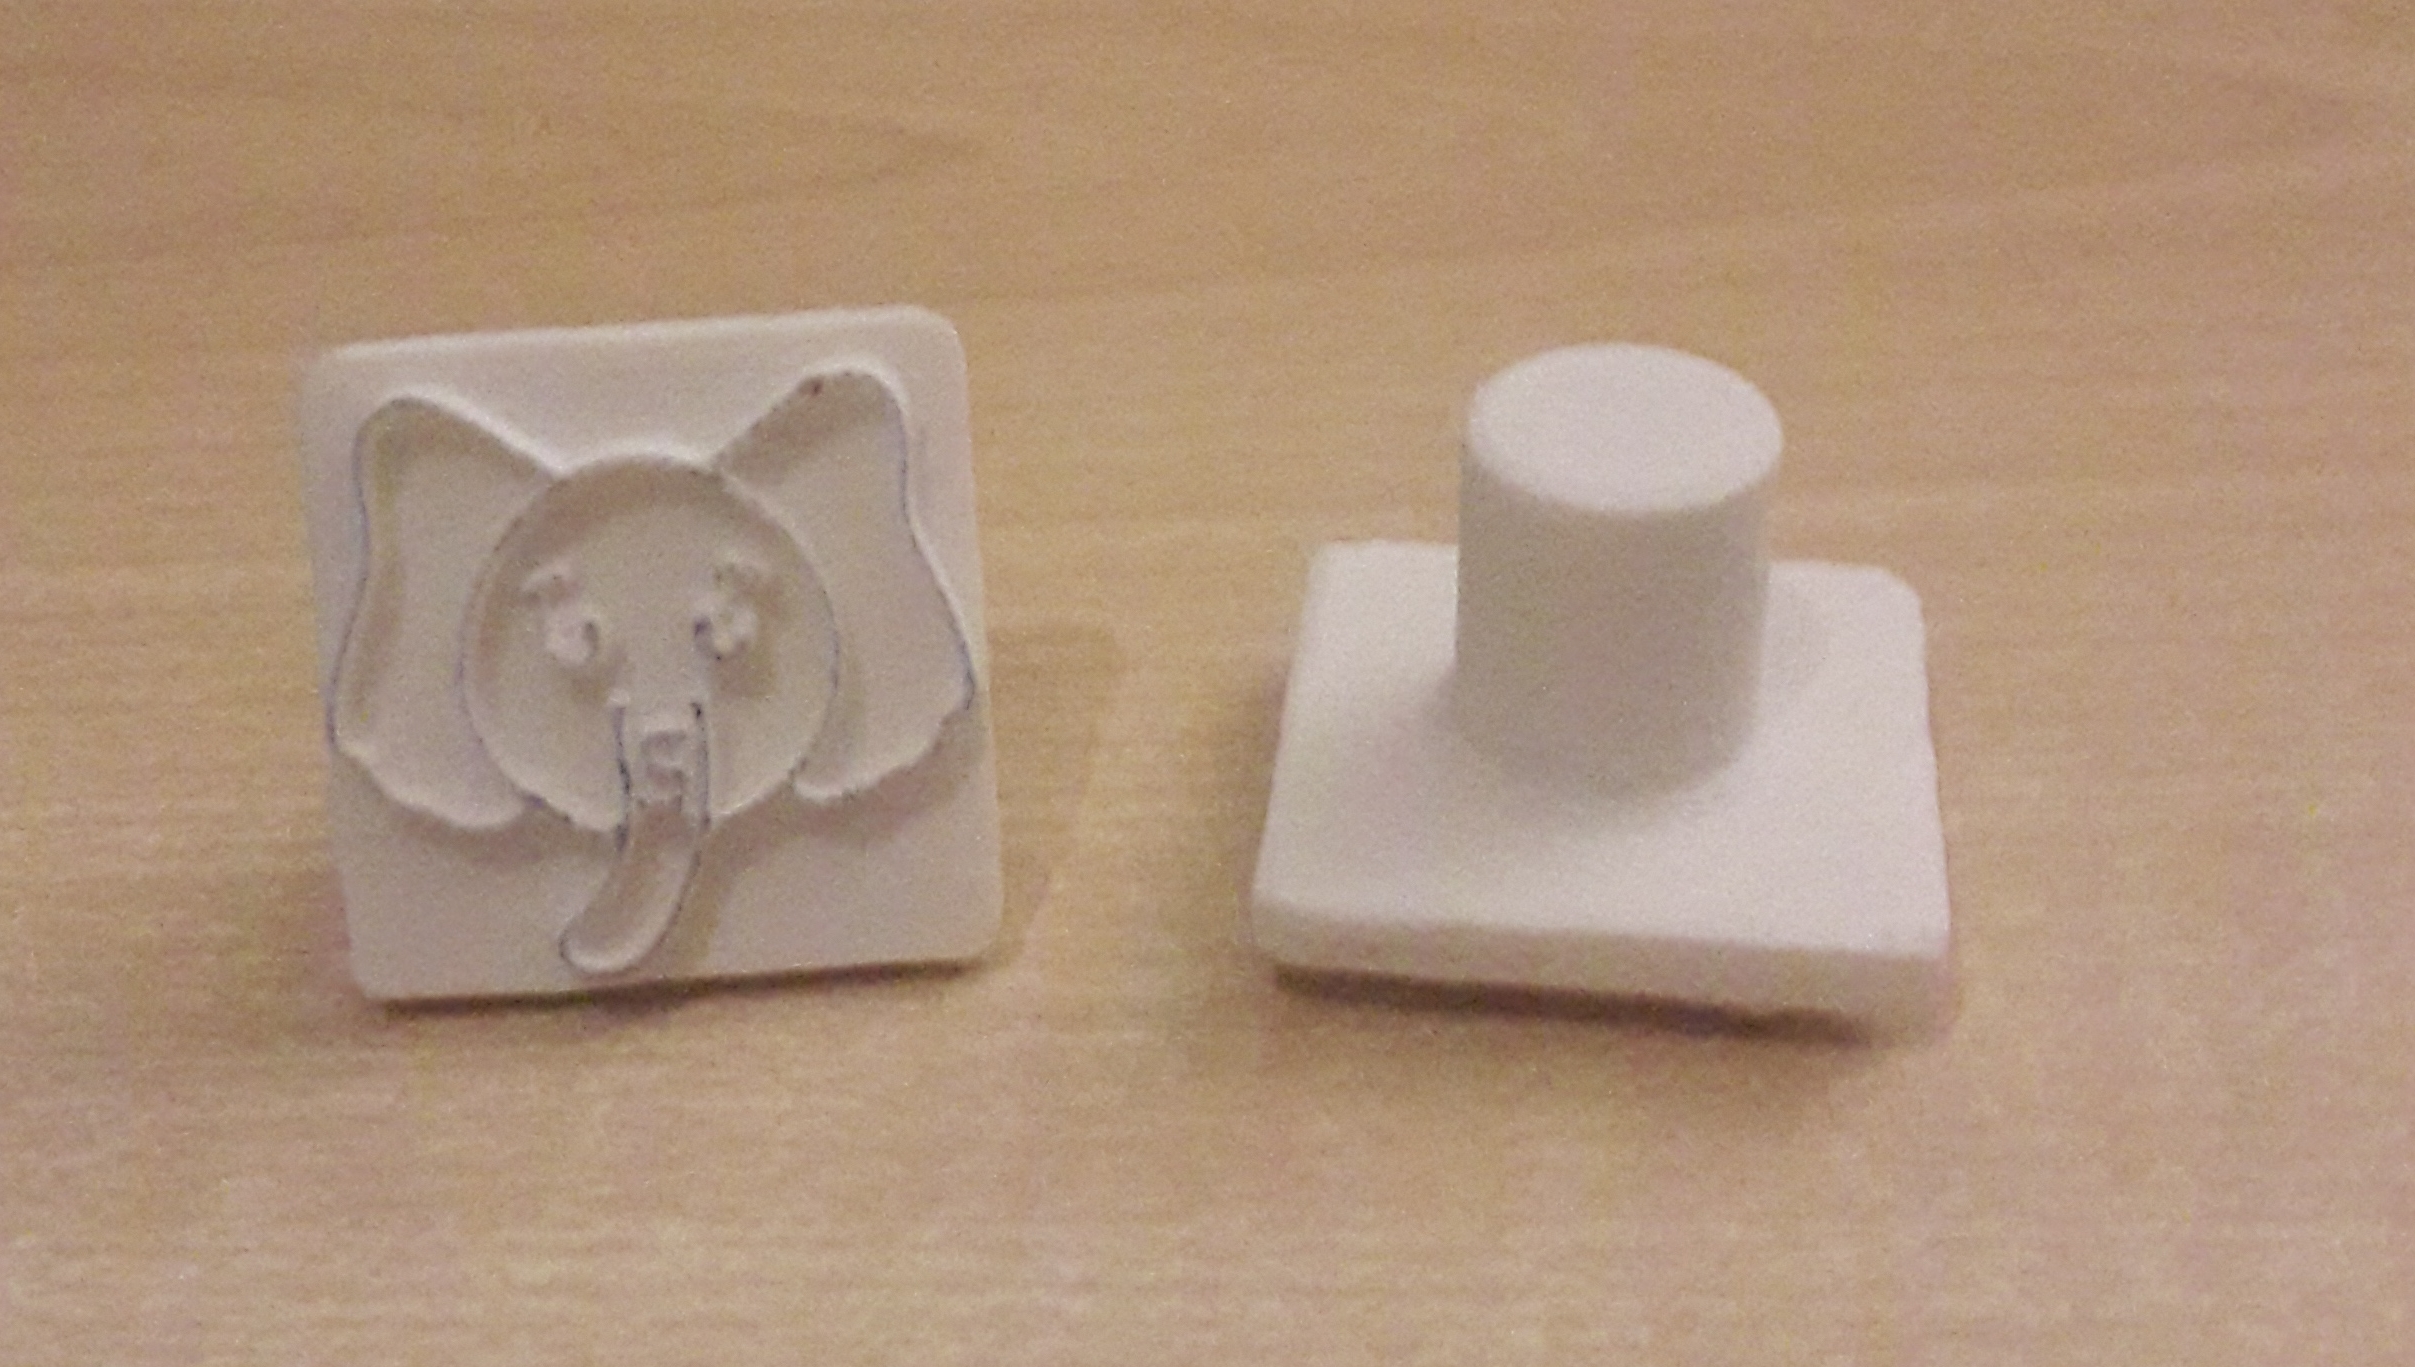 simple stamp with animal motive - elephant - to reward the little once